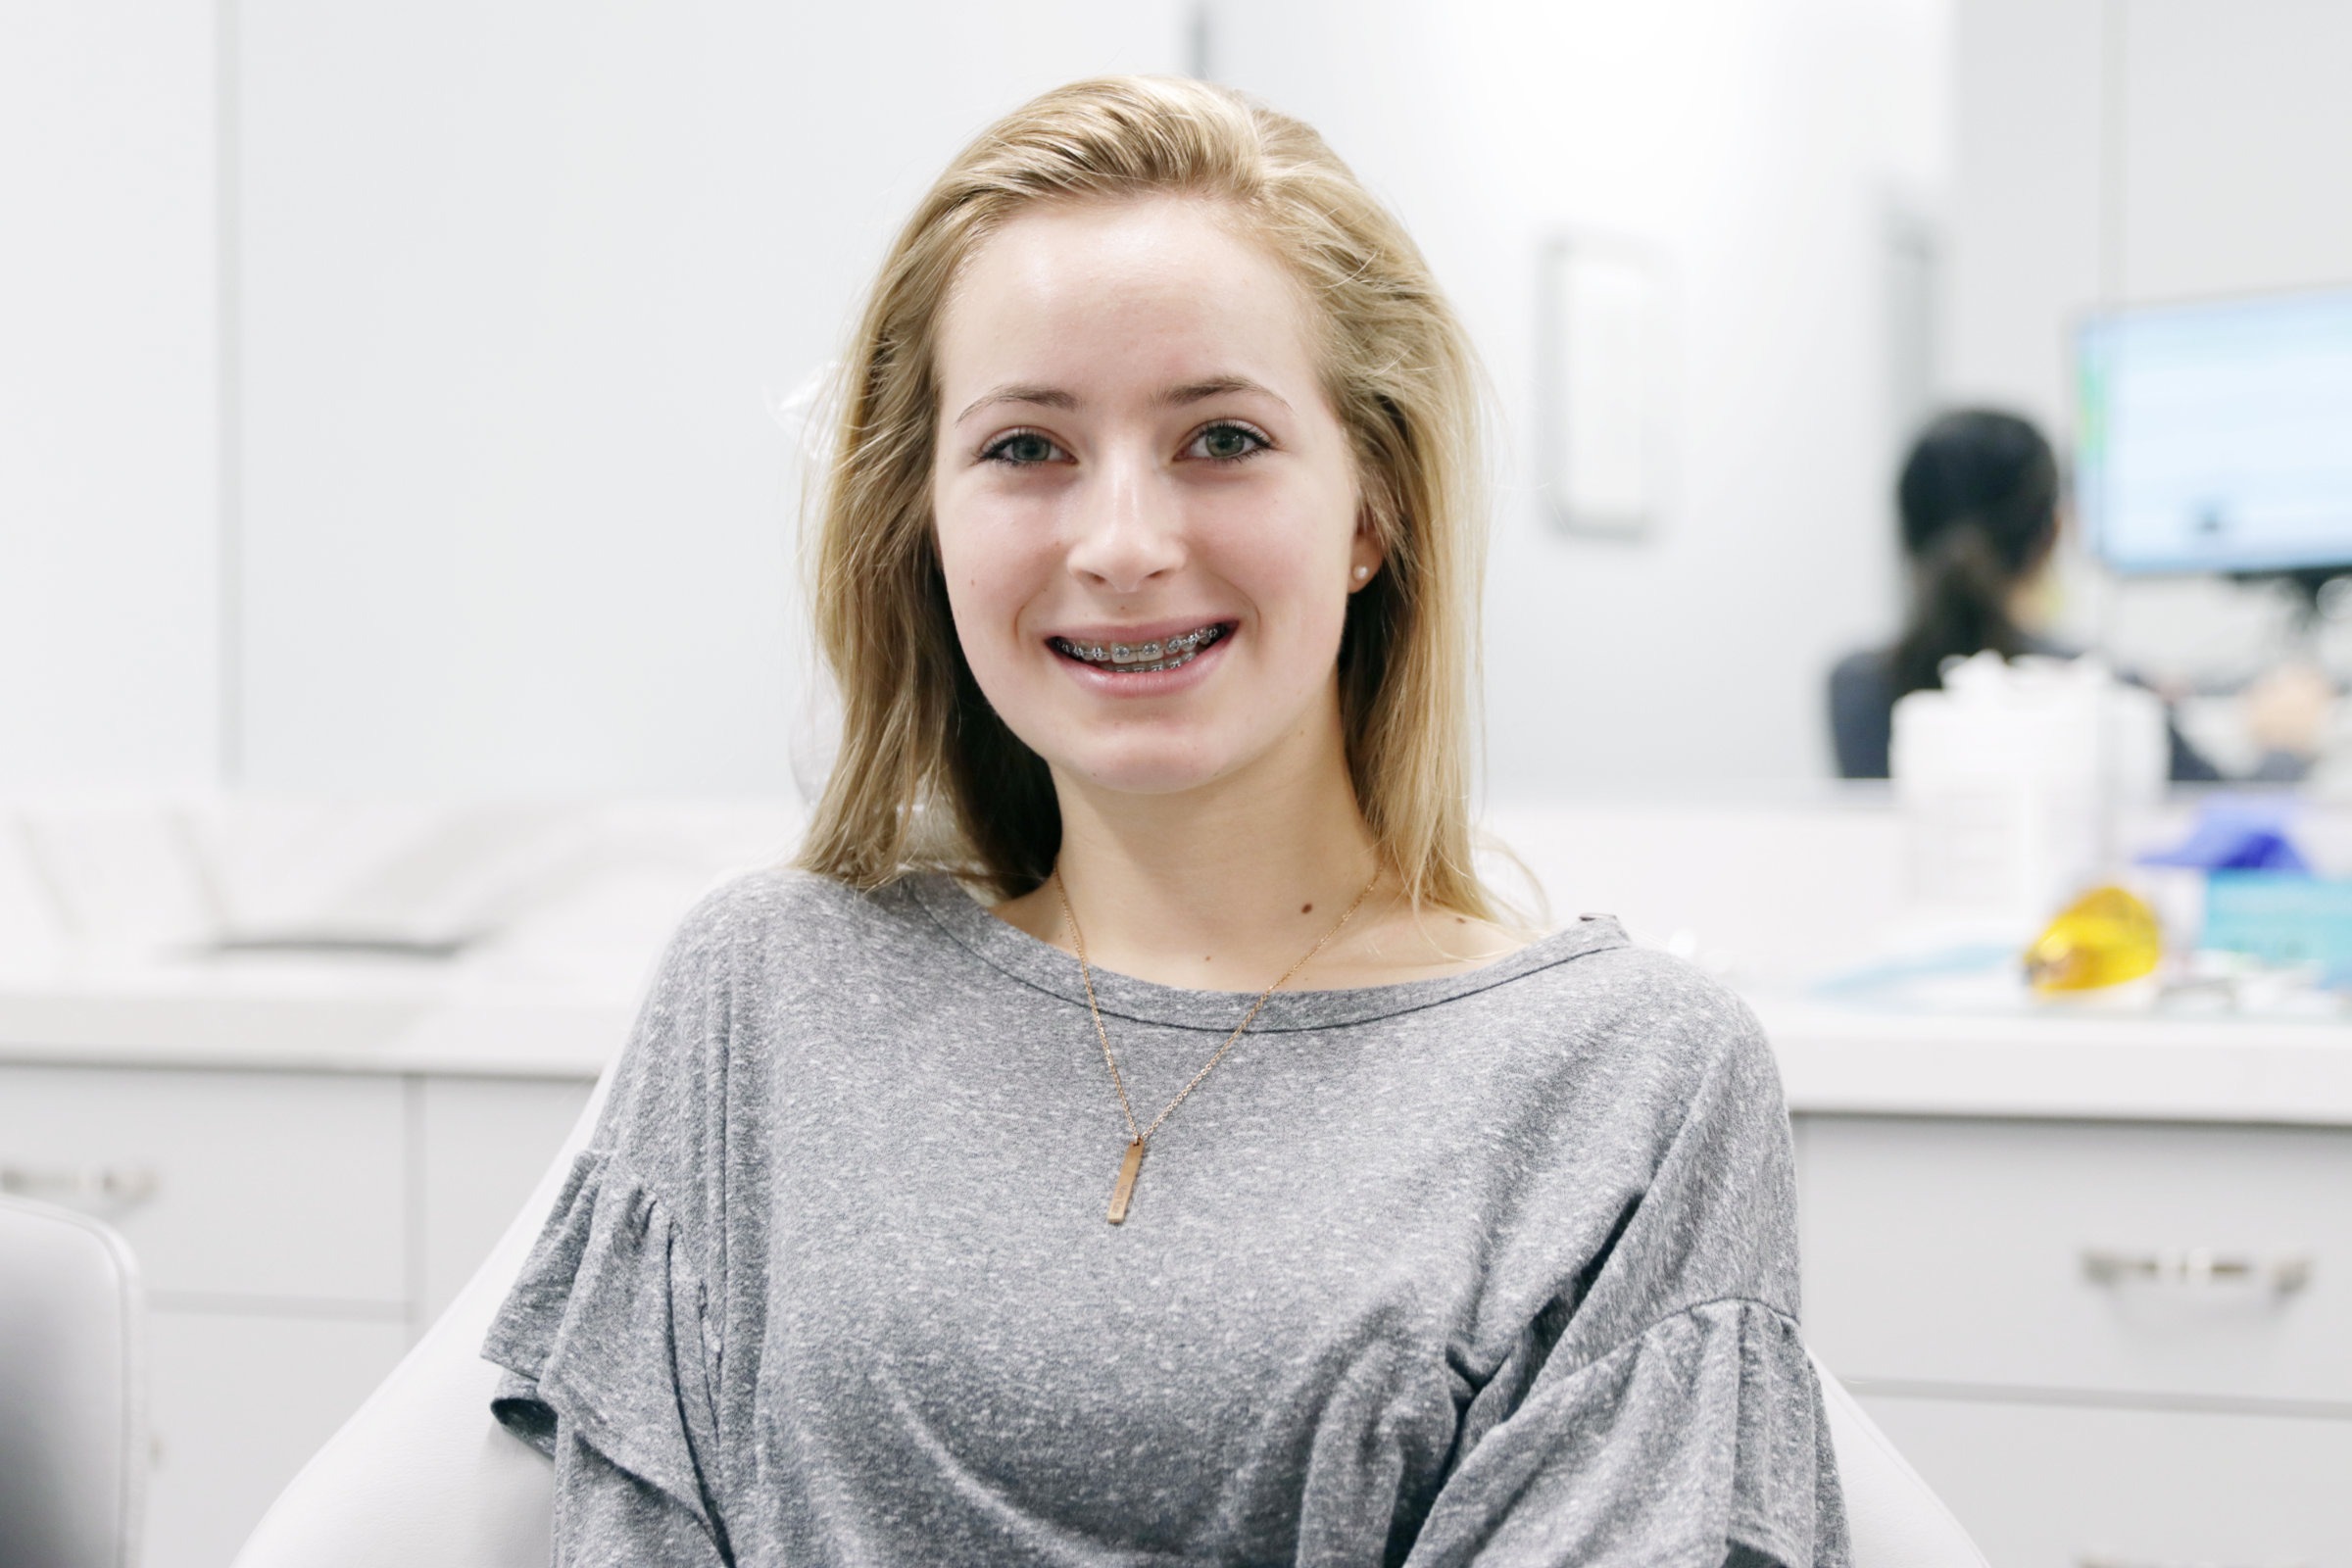 Teen With Braces: The Available Options | IT Pharmacy